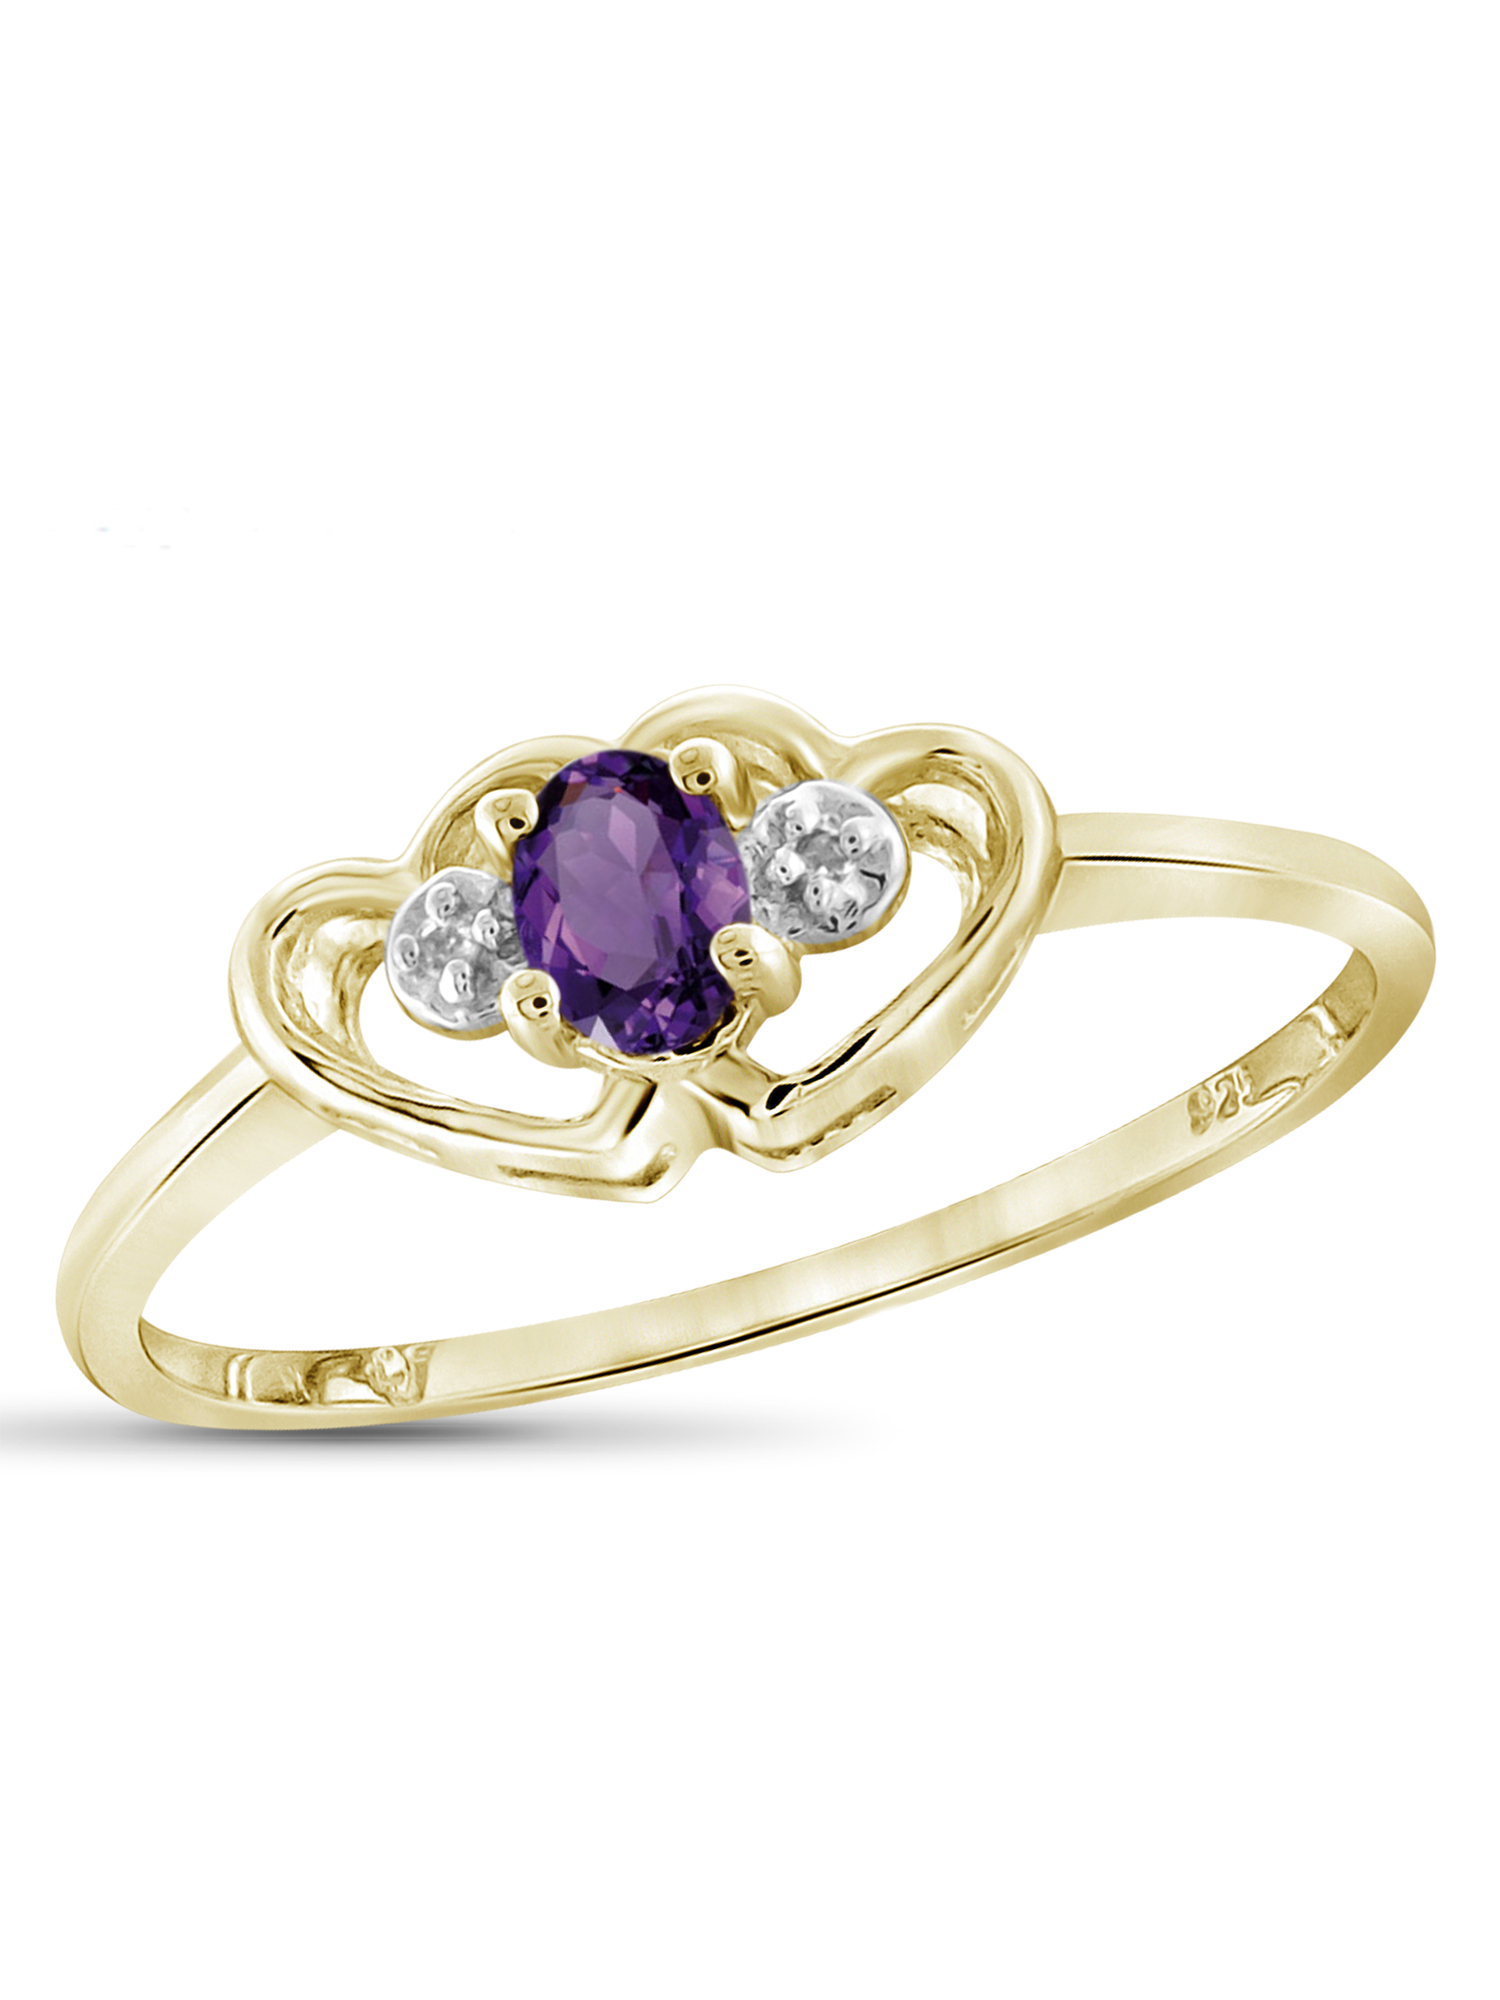 JewelersClub Amethyst Ring Birthstone Jewelry – 0.15 Carat Amethyst 14K Gold Plated Silver Ring Jewelry with White Diamond Accent – Gemstone Rings with Hypoallergenic 14K Gold Plated Silver Band - image 1 of 4